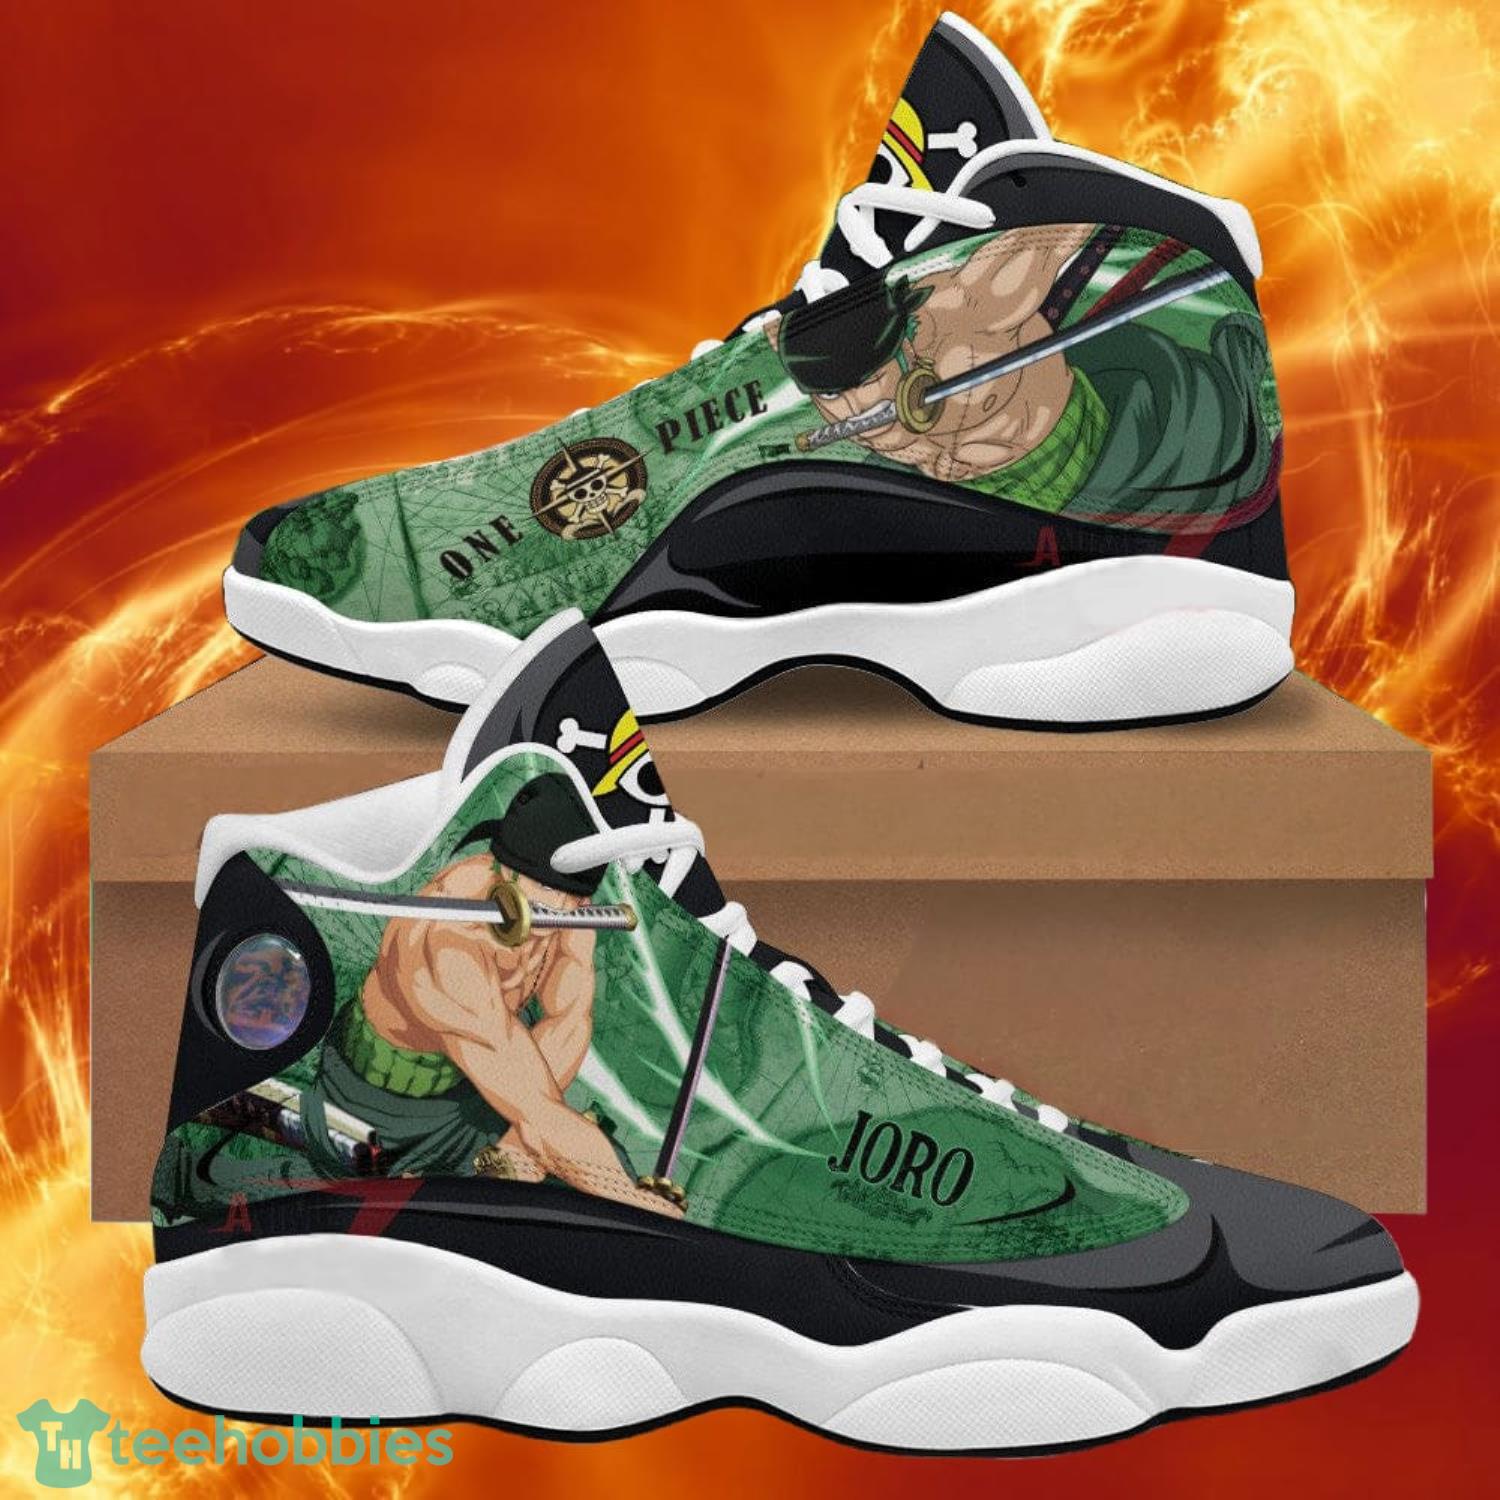 Childrens Shoes Naruto Breathable Sports Running Shoes Anime Sneakers 3999  - Walmart.ca